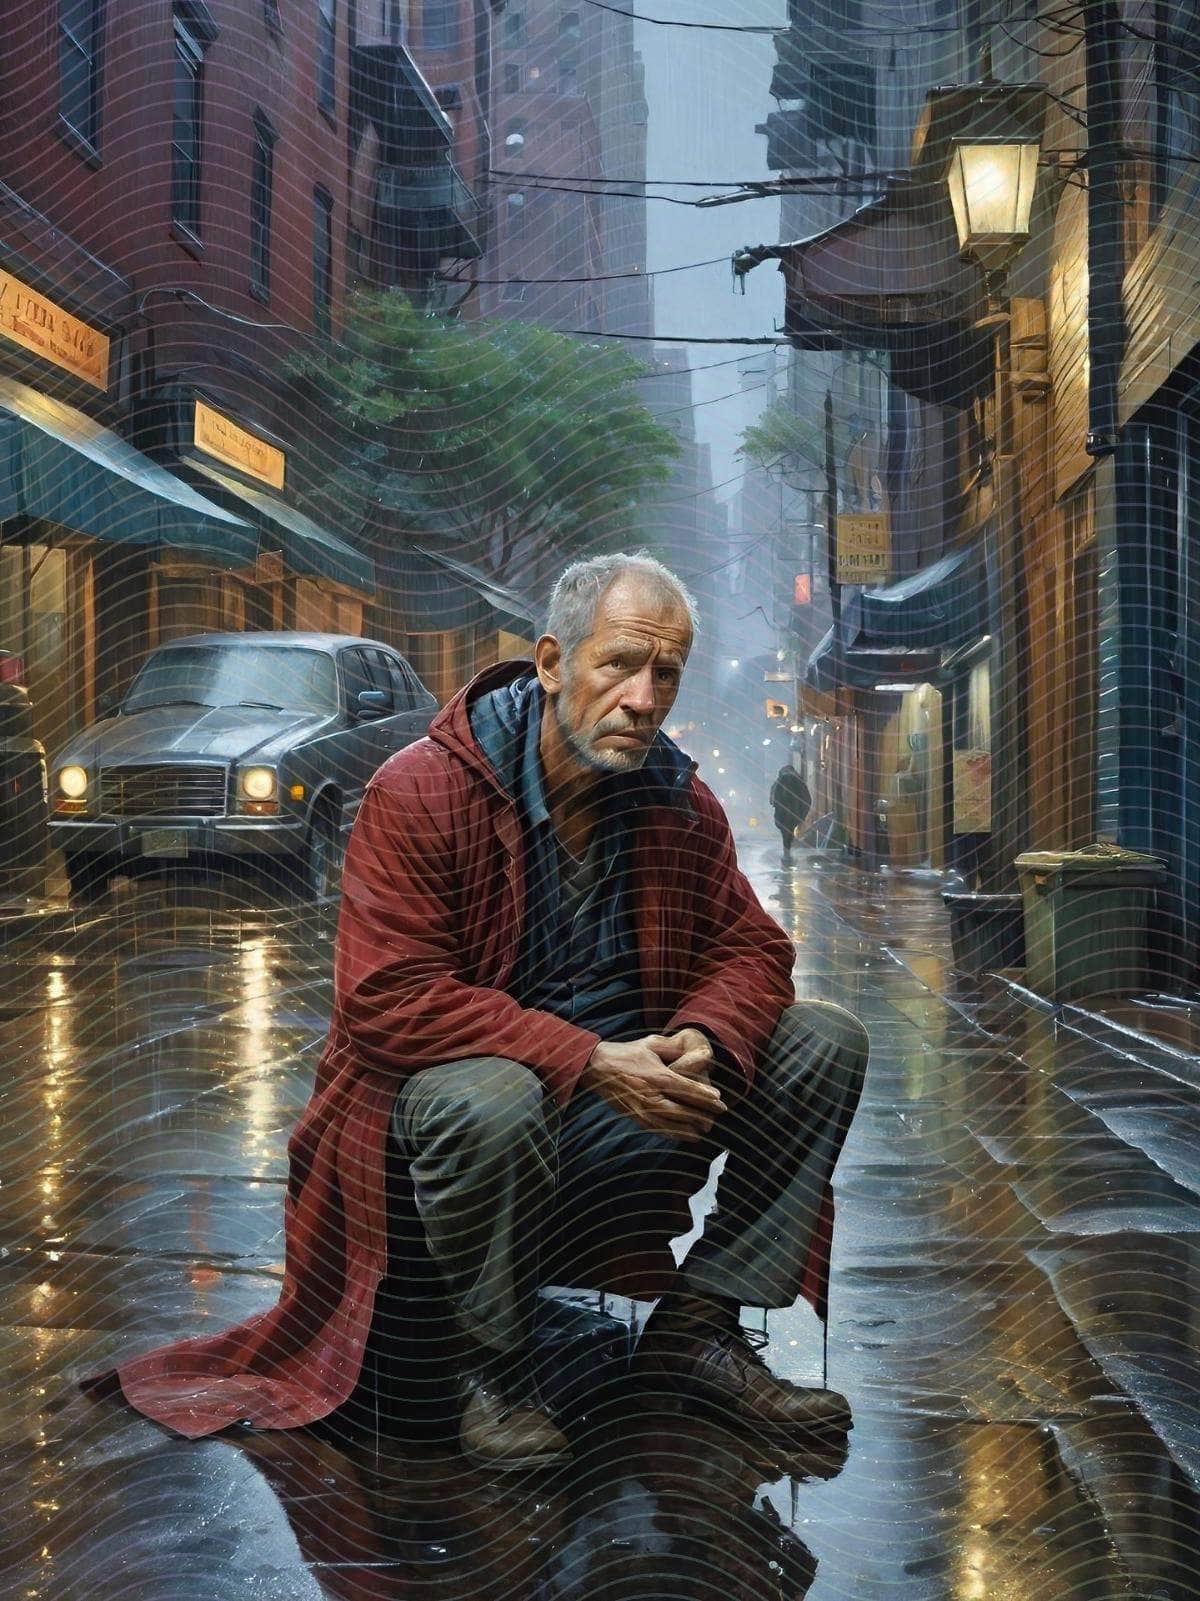 A Detailed Scene of A Man Sitting on the Ground in the Rain